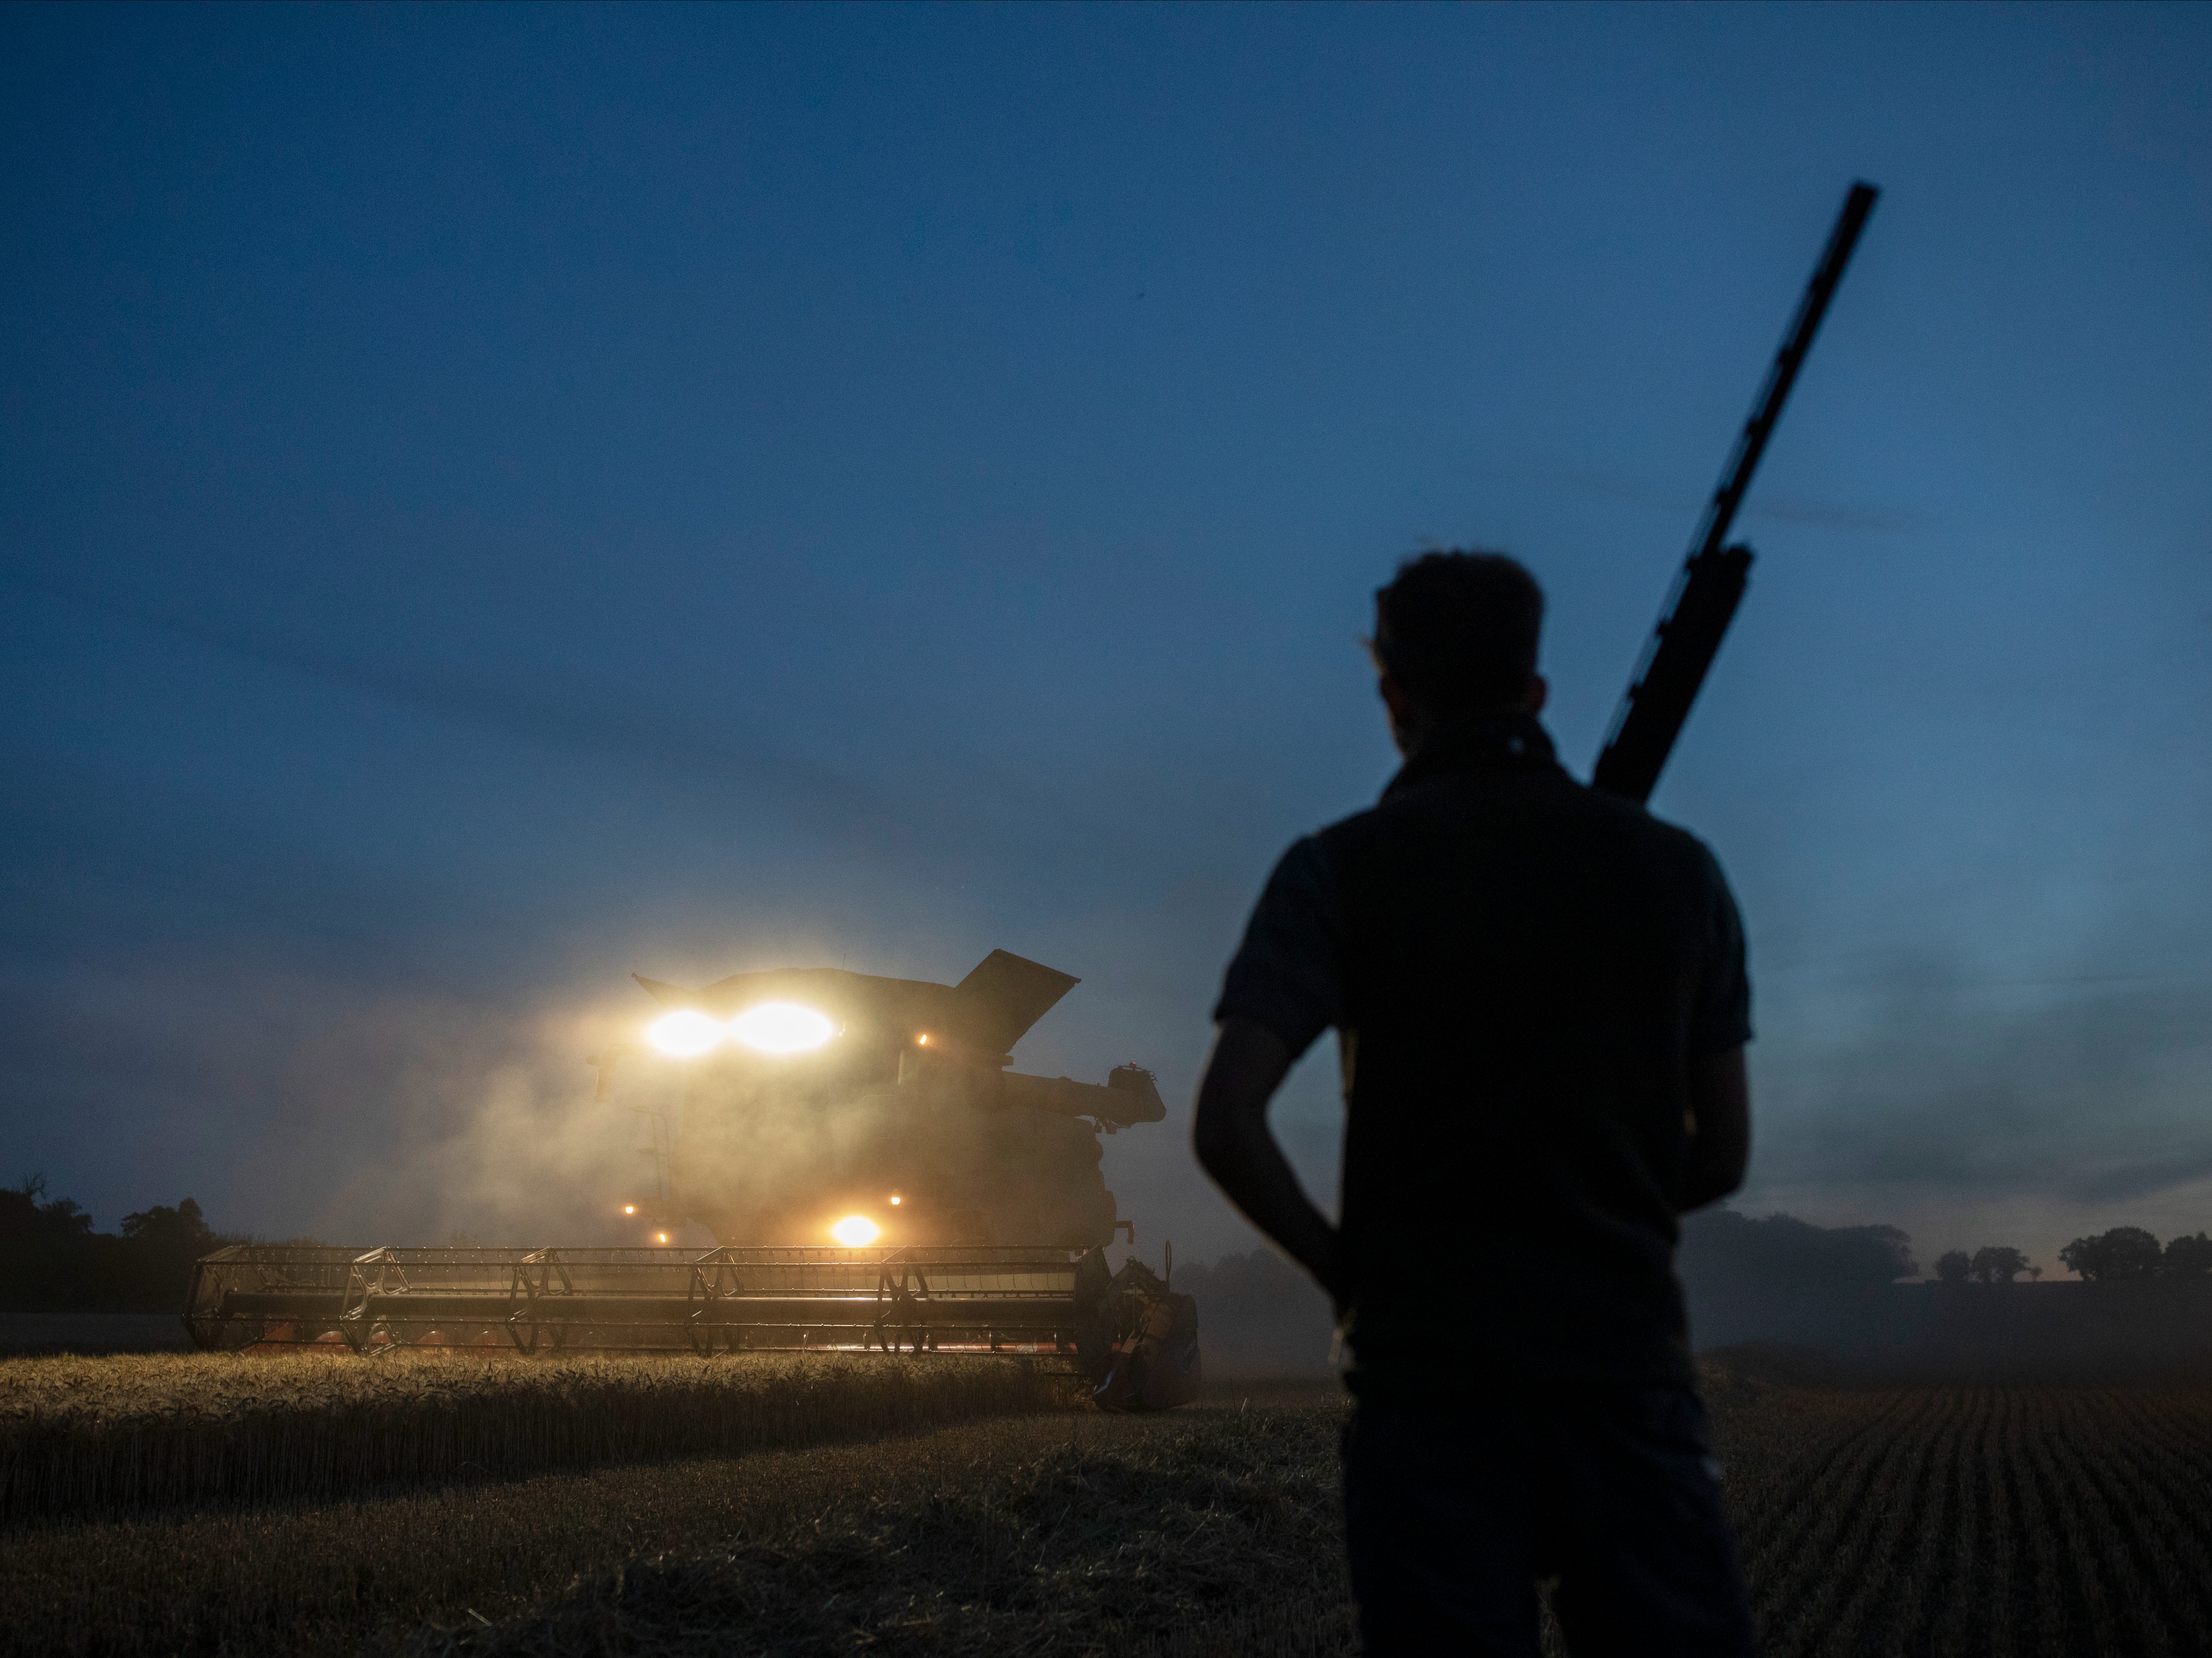 A man stands with a shotgun as wheat is harvested in a field in England